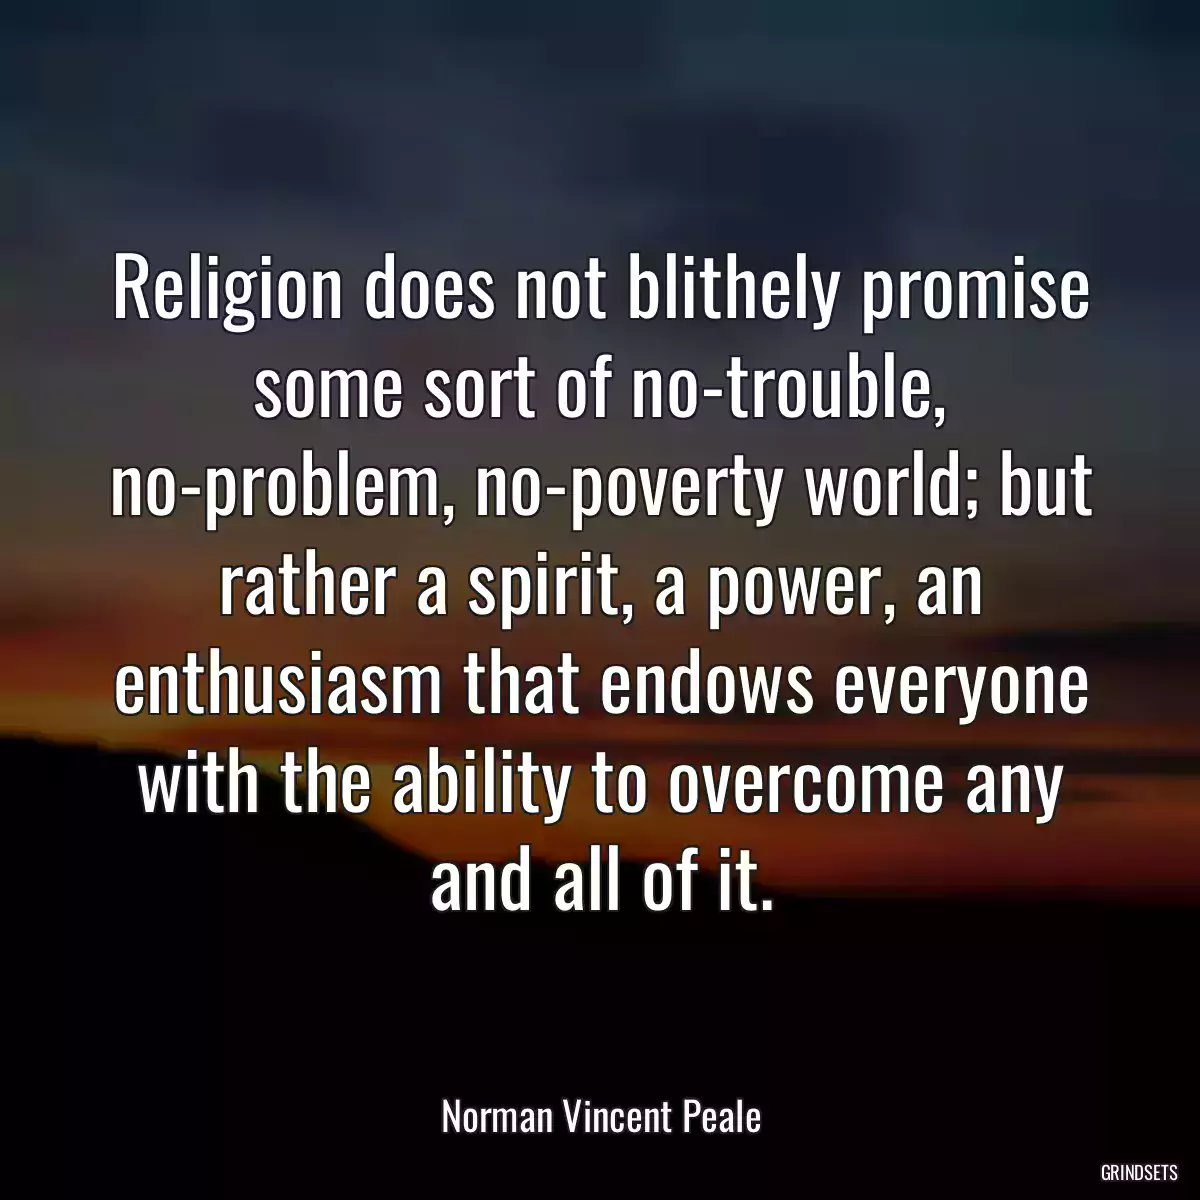 Religion does not blithely promise some sort of no-trouble, no-problem, no-poverty world; but rather a spirit, a power, an enthusiasm that endows everyone with the ability to overcome any and all of it.